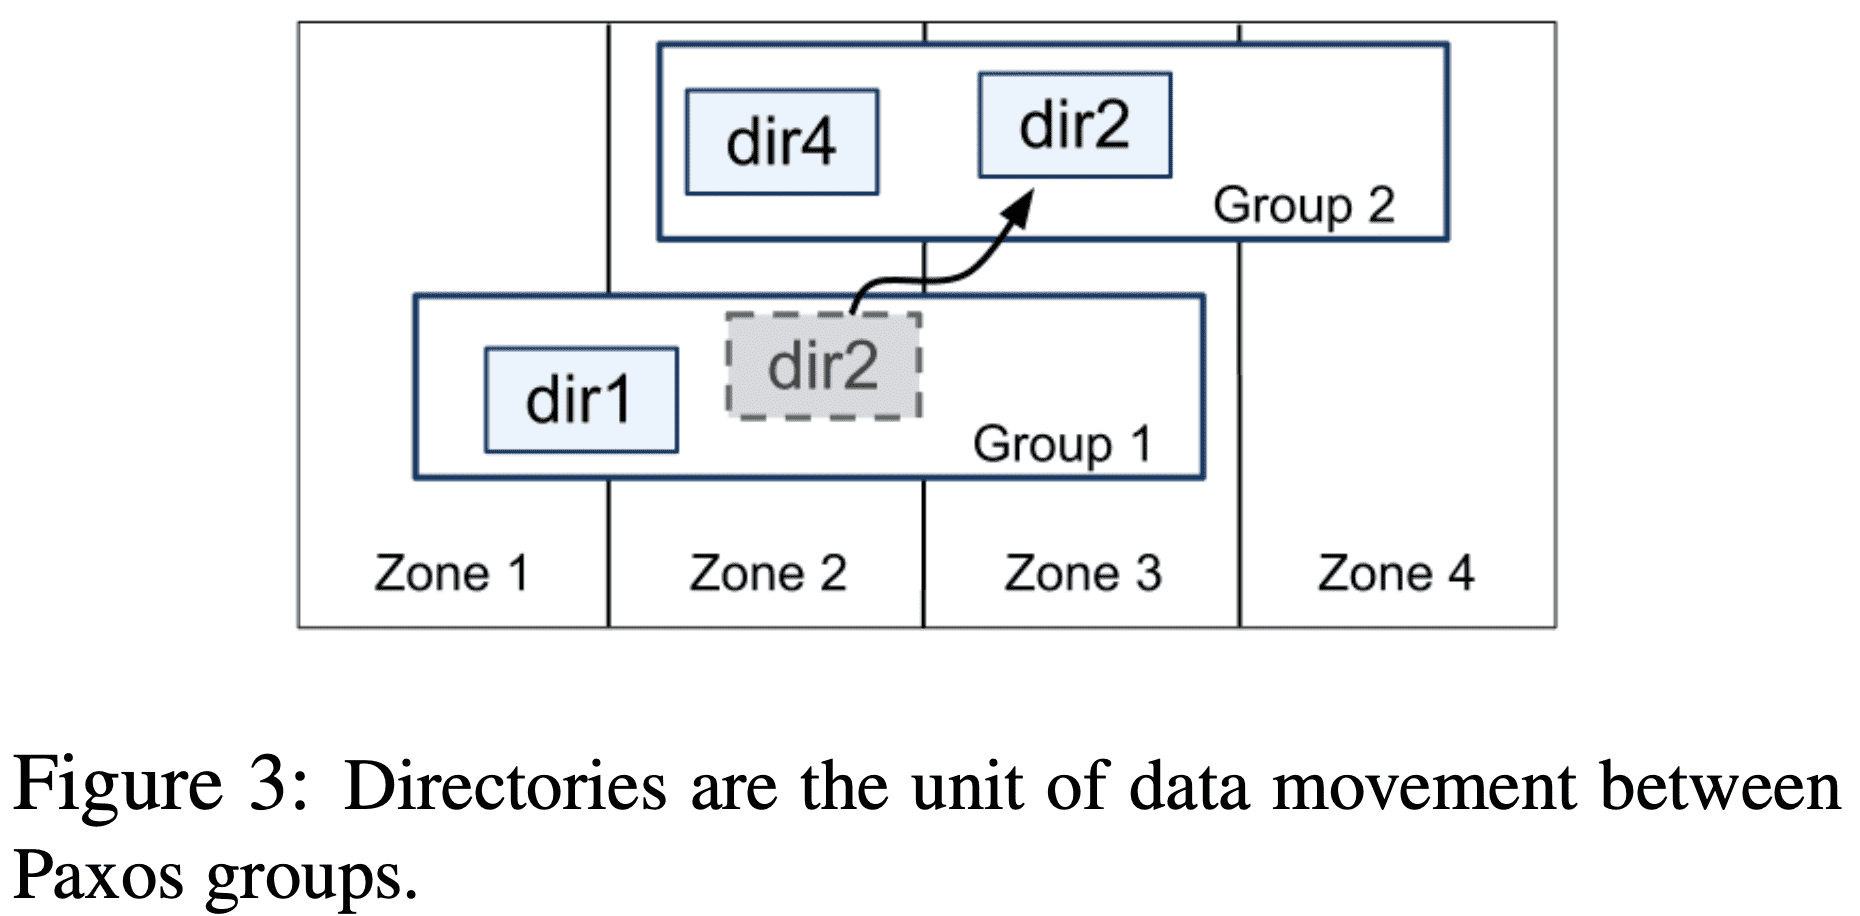 directoreis are the unit of data movement between paxos groups